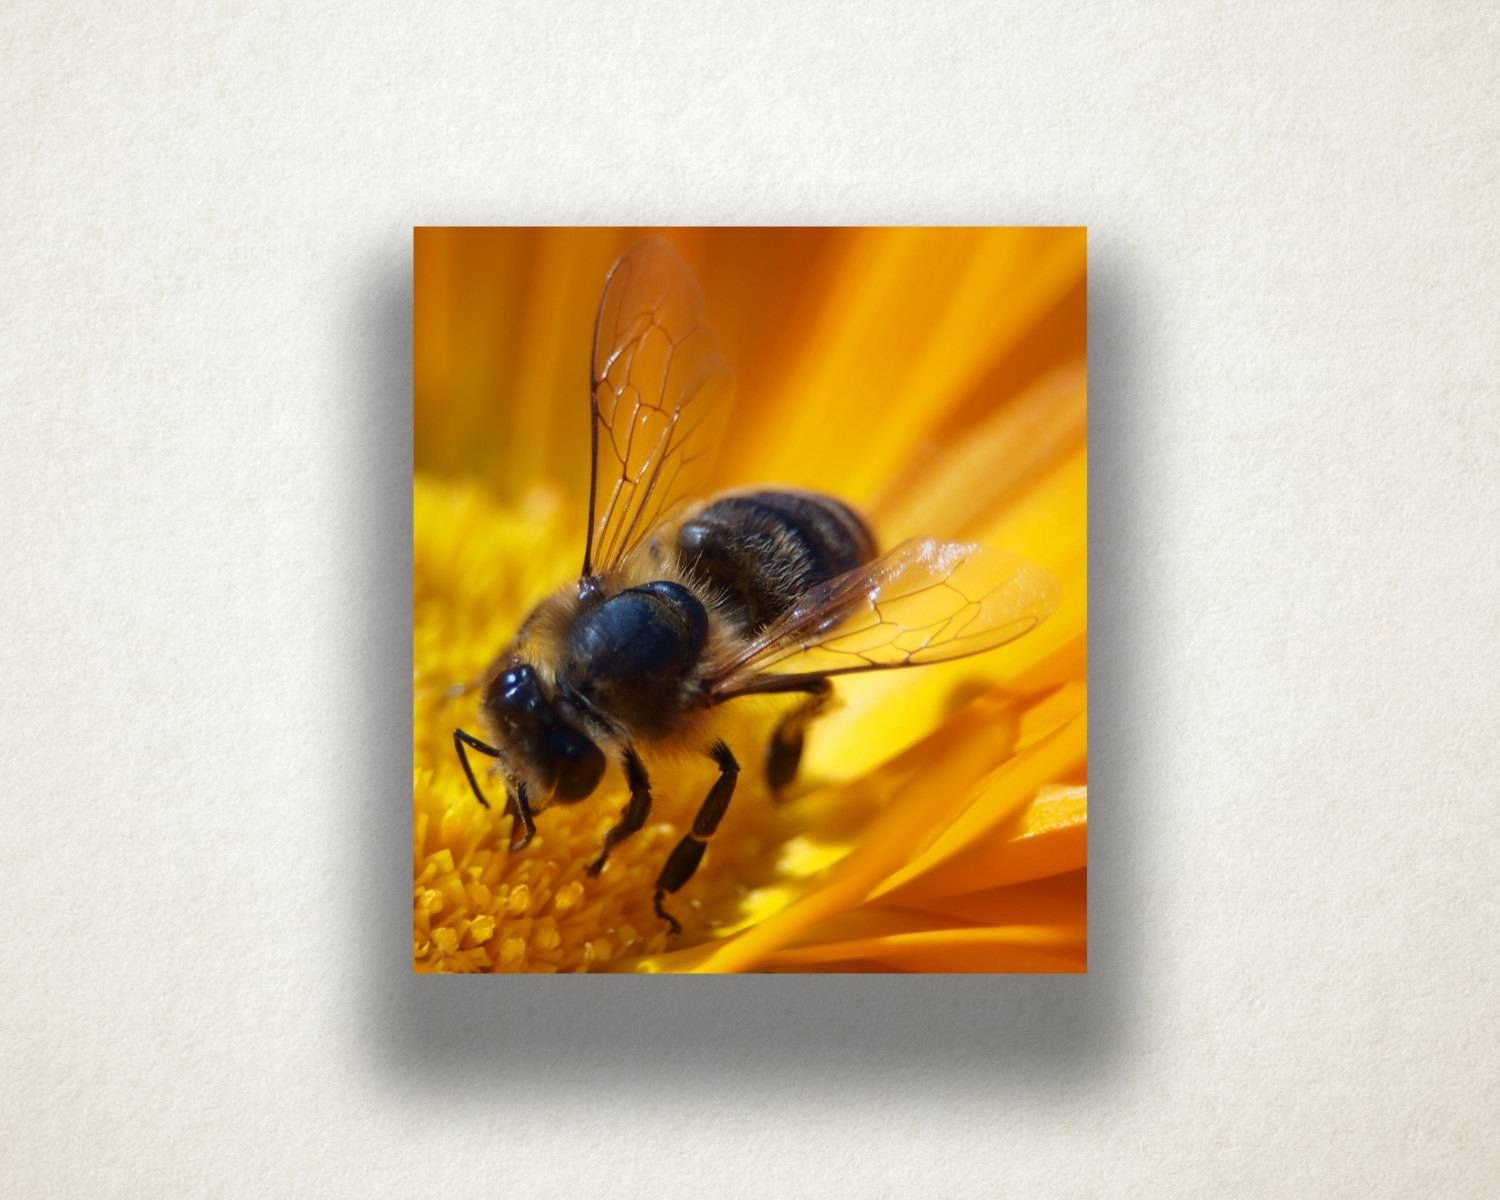 Flower And Bee Canvas Art, Bee Close Up Wall Art, Insect Canvas Throughout Most Recently Released Insect Wall Art (Gallery 11 of 30)